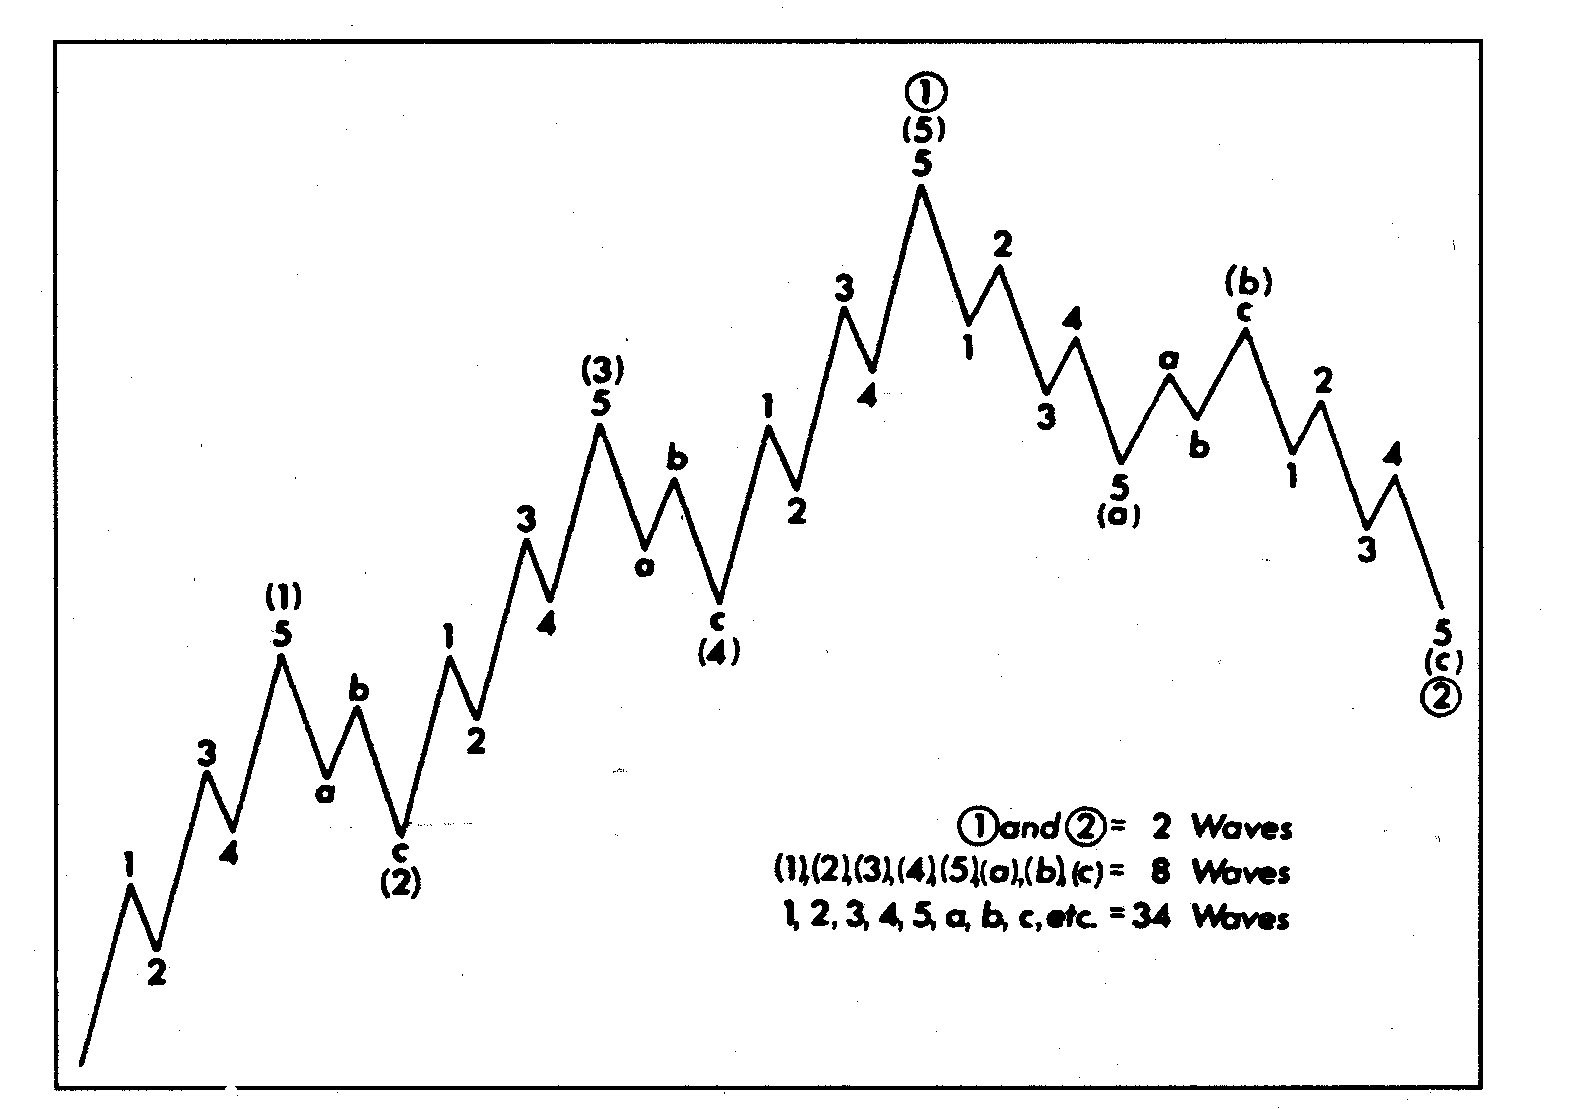 [Compound Elliot Wave with 5 Sub-waves]